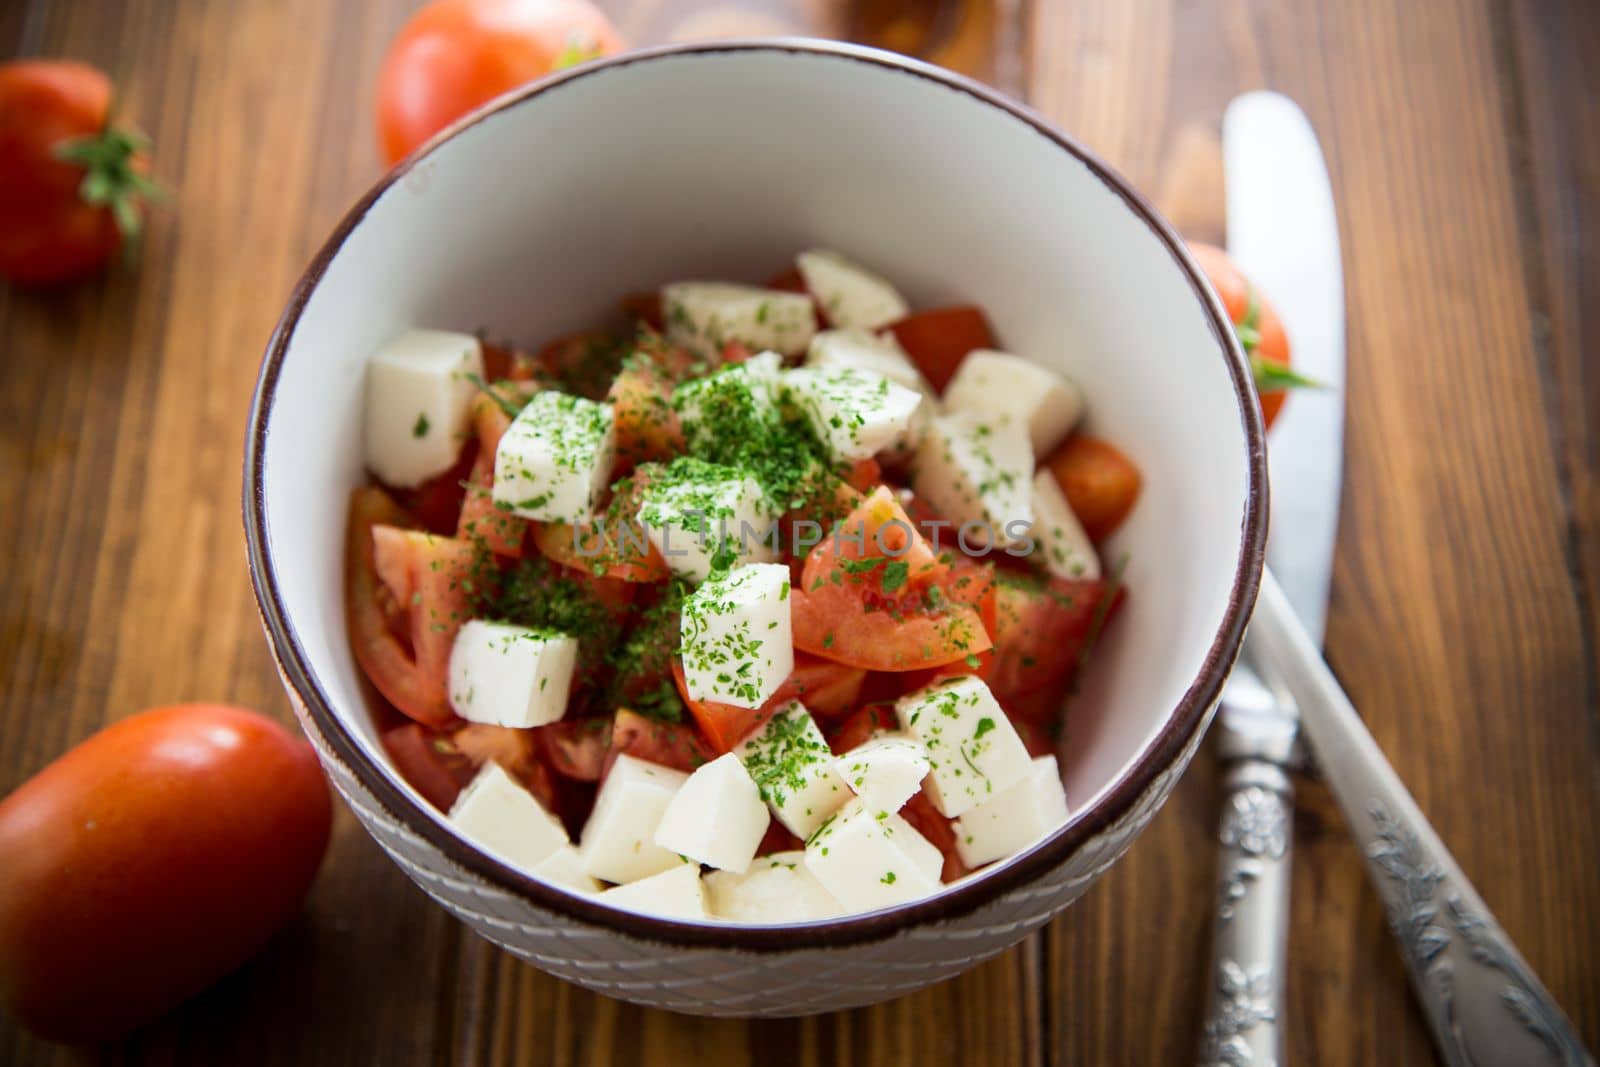 salad of fresh ripe tomatoes with mozzarella and spices in a bowl on a wooden table